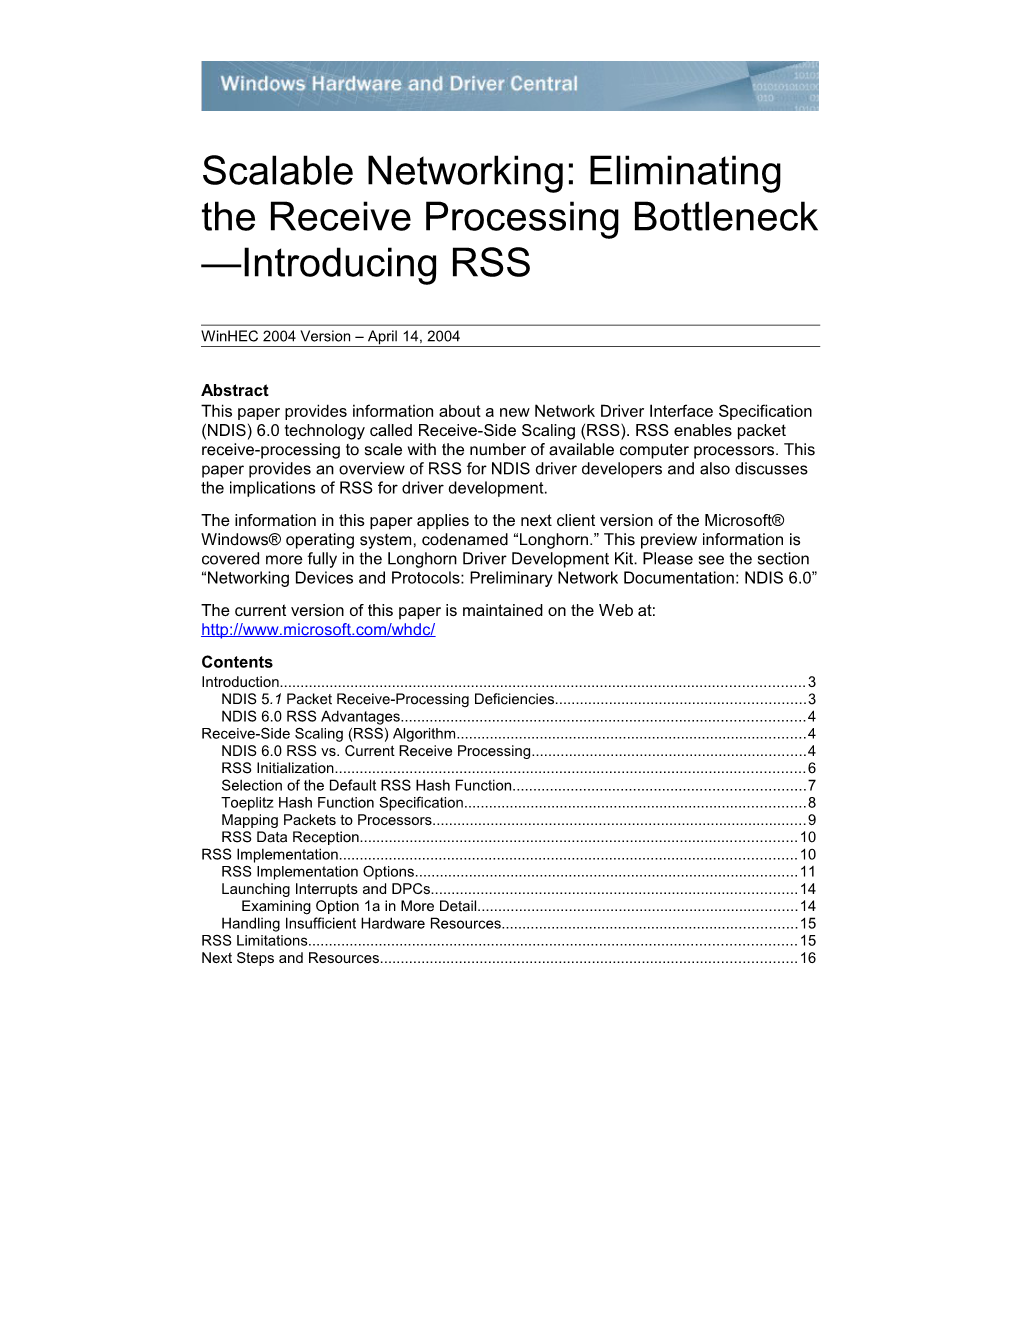 Scalable Networking: Eliminating the Receive Processing Bottleneck-Introducing RSS